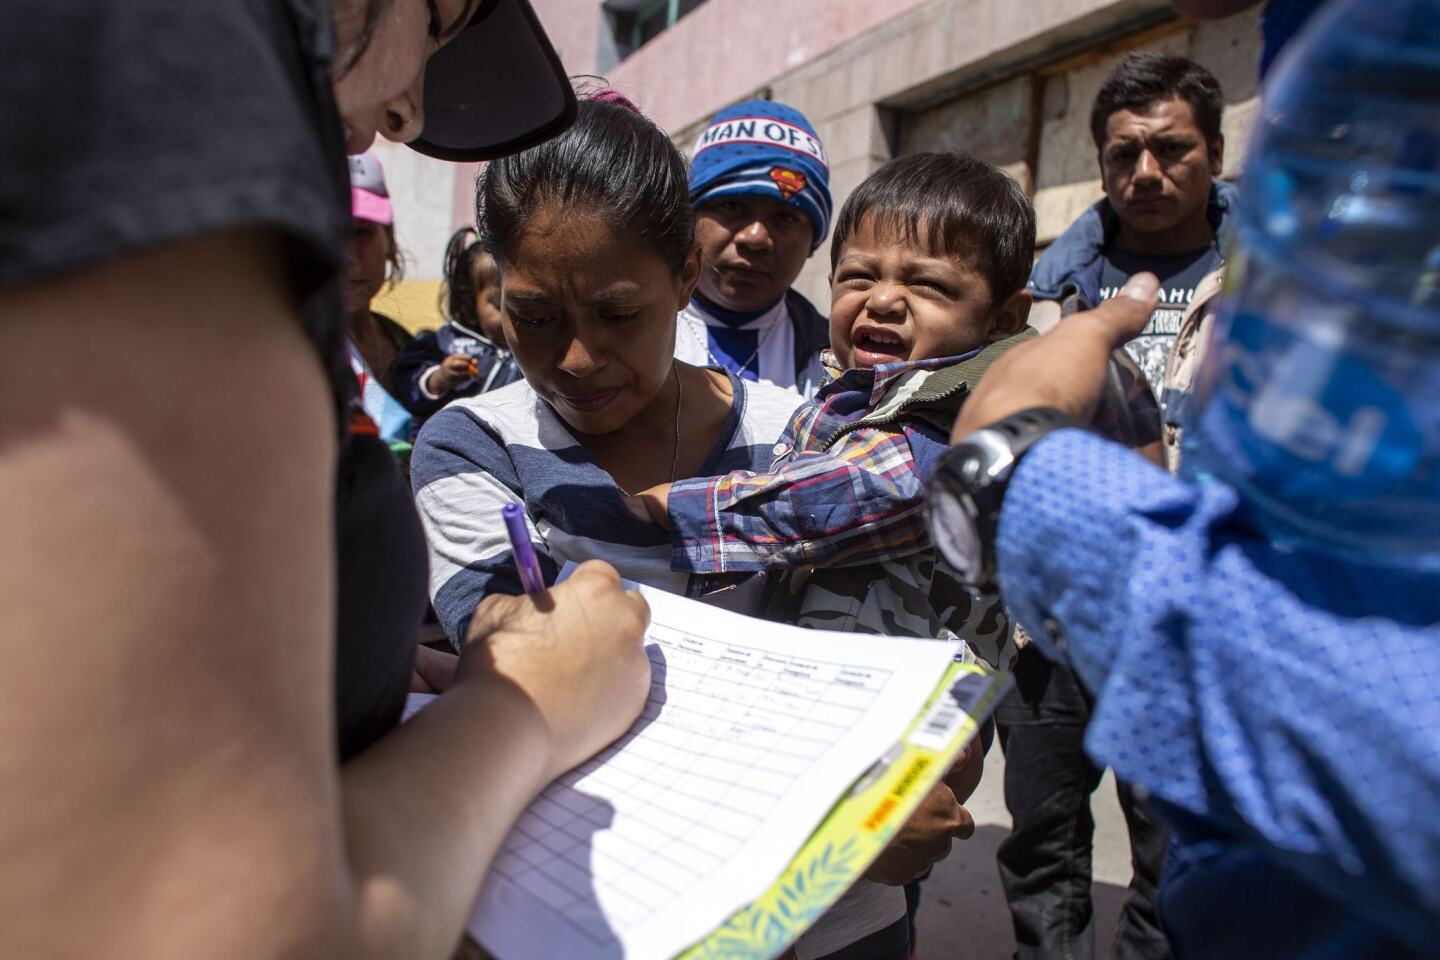 Immigrants fleeing Central American register for legal counseling in Tijuana. Lawyers have volunteered to help people seeking asylum.